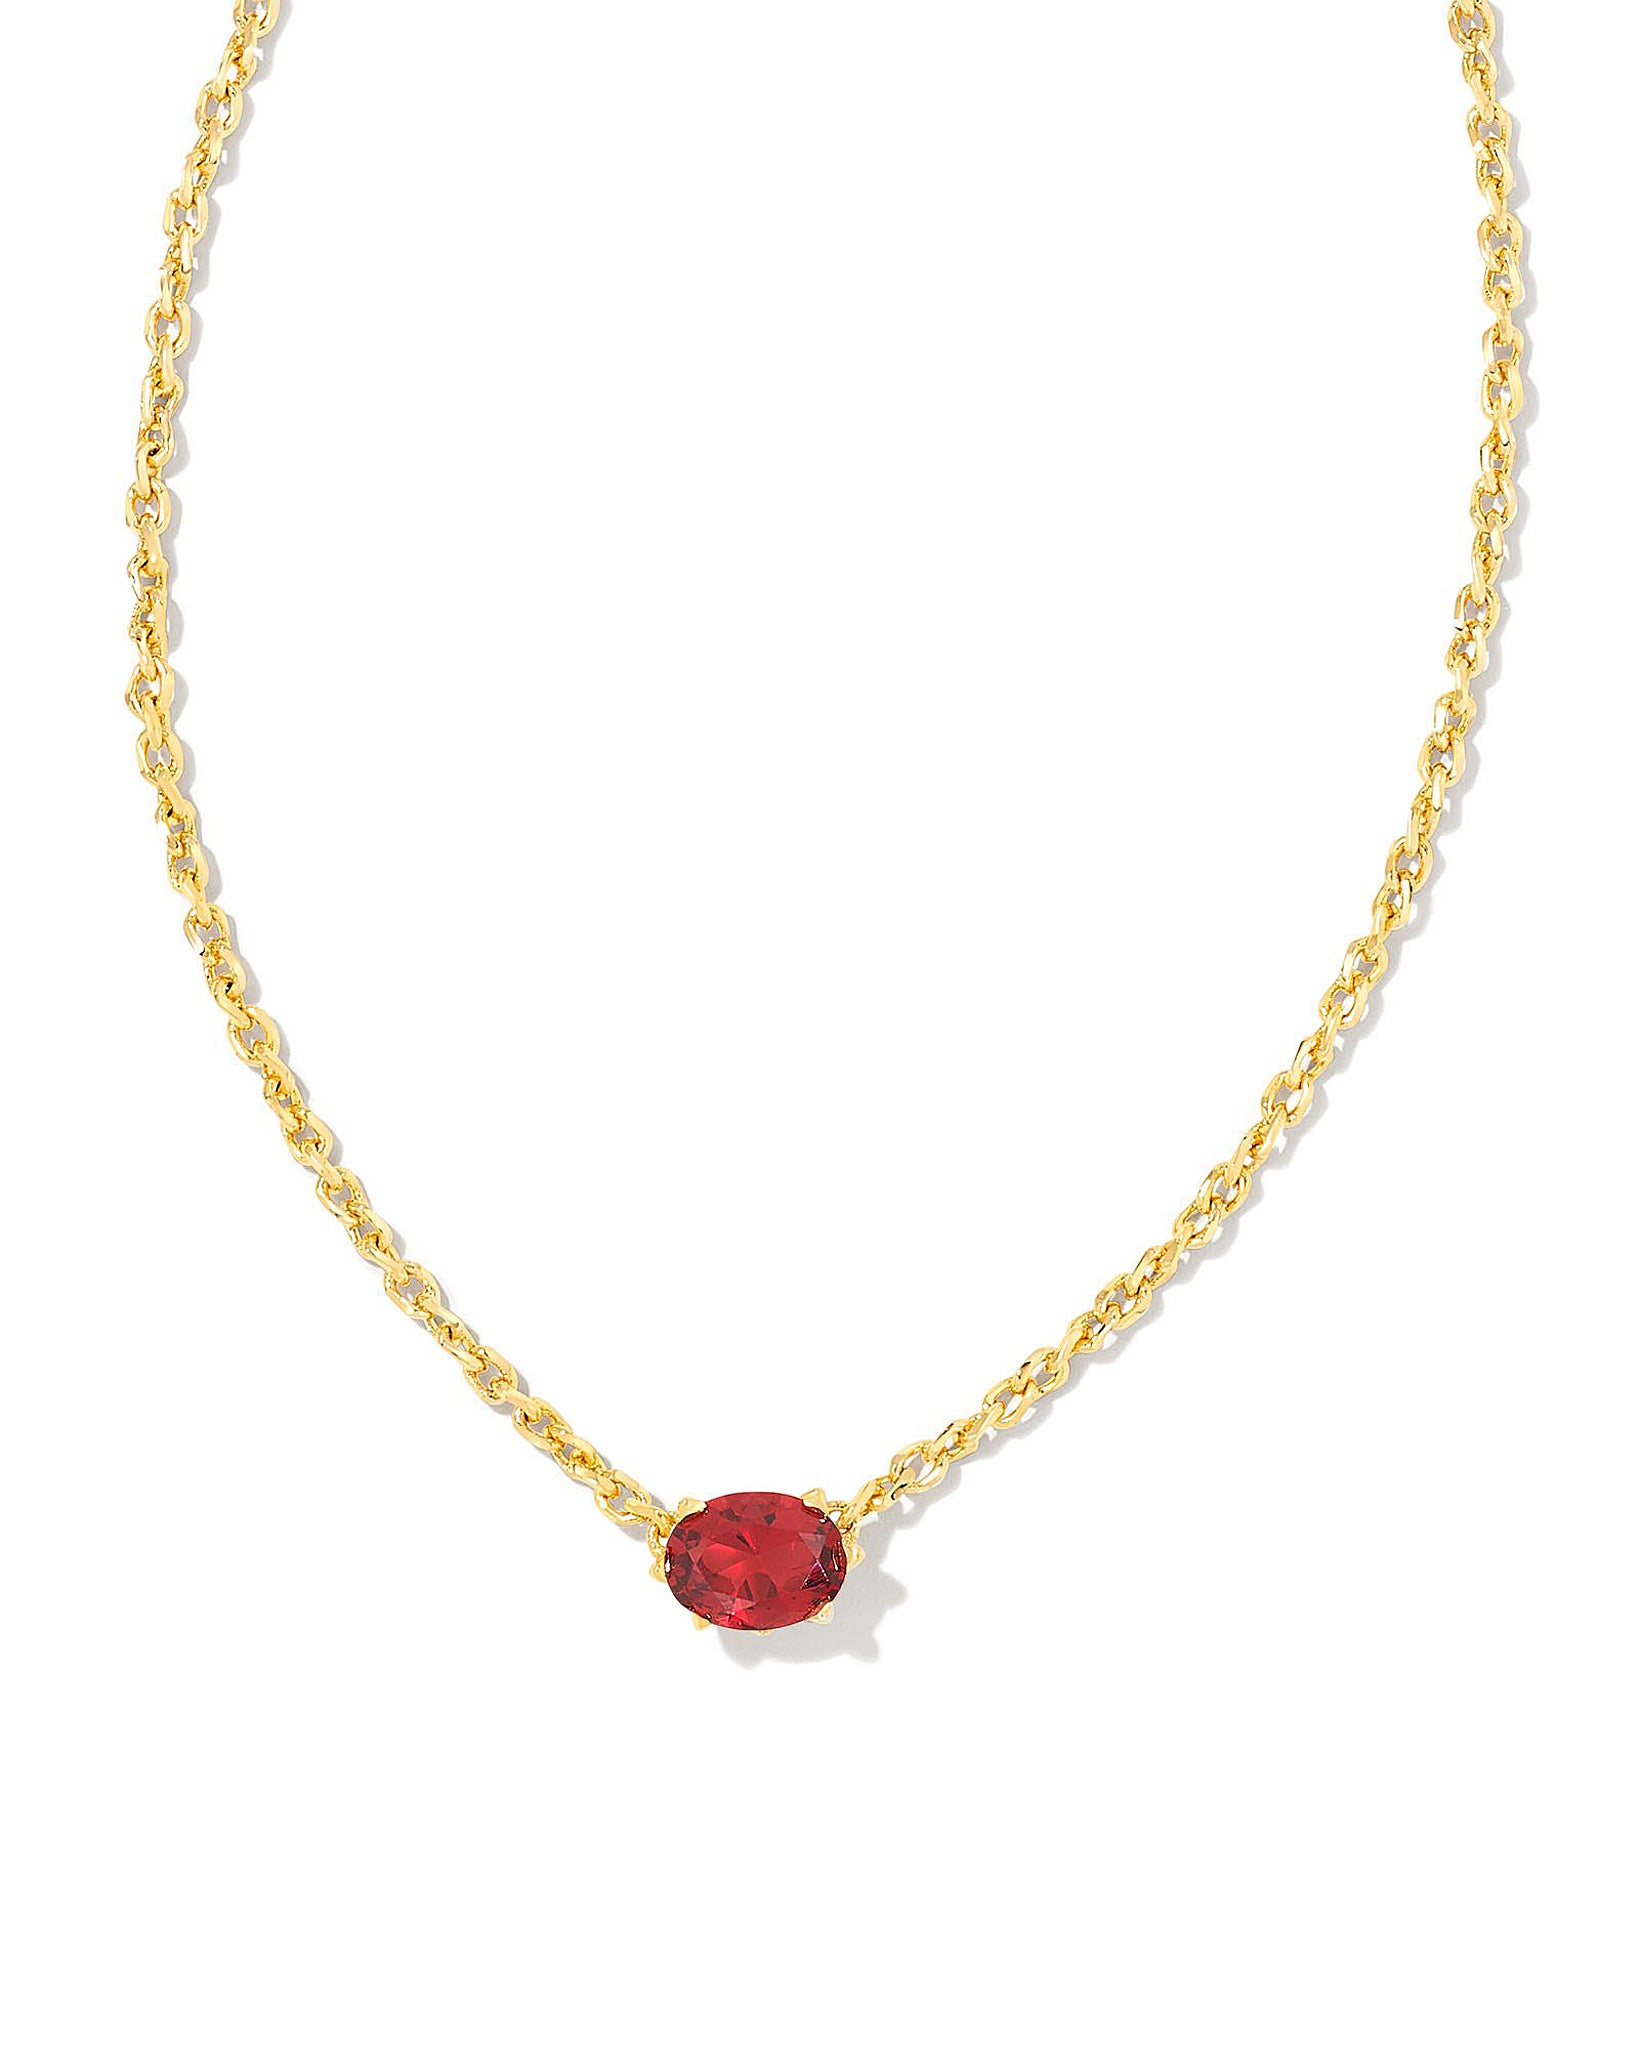 Kendra Scott Cailin Oval Pendant Necklace in Burgundy Red Crystal and Gold